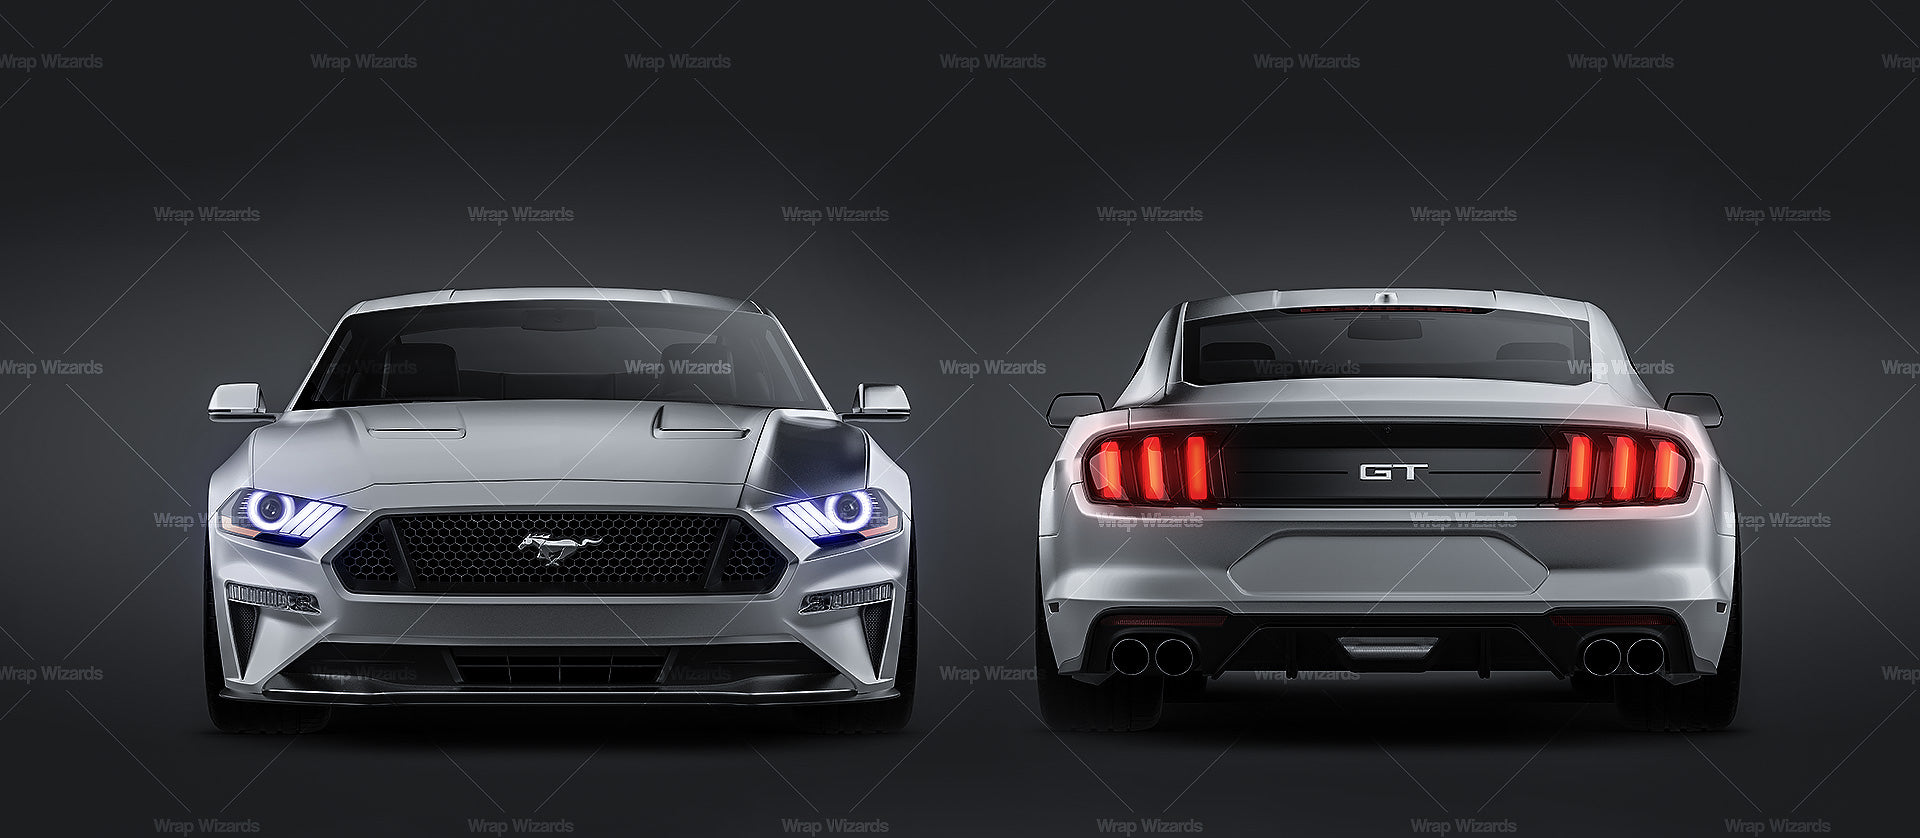 Ford Mustang GT coupe 2018 - Car Mockup